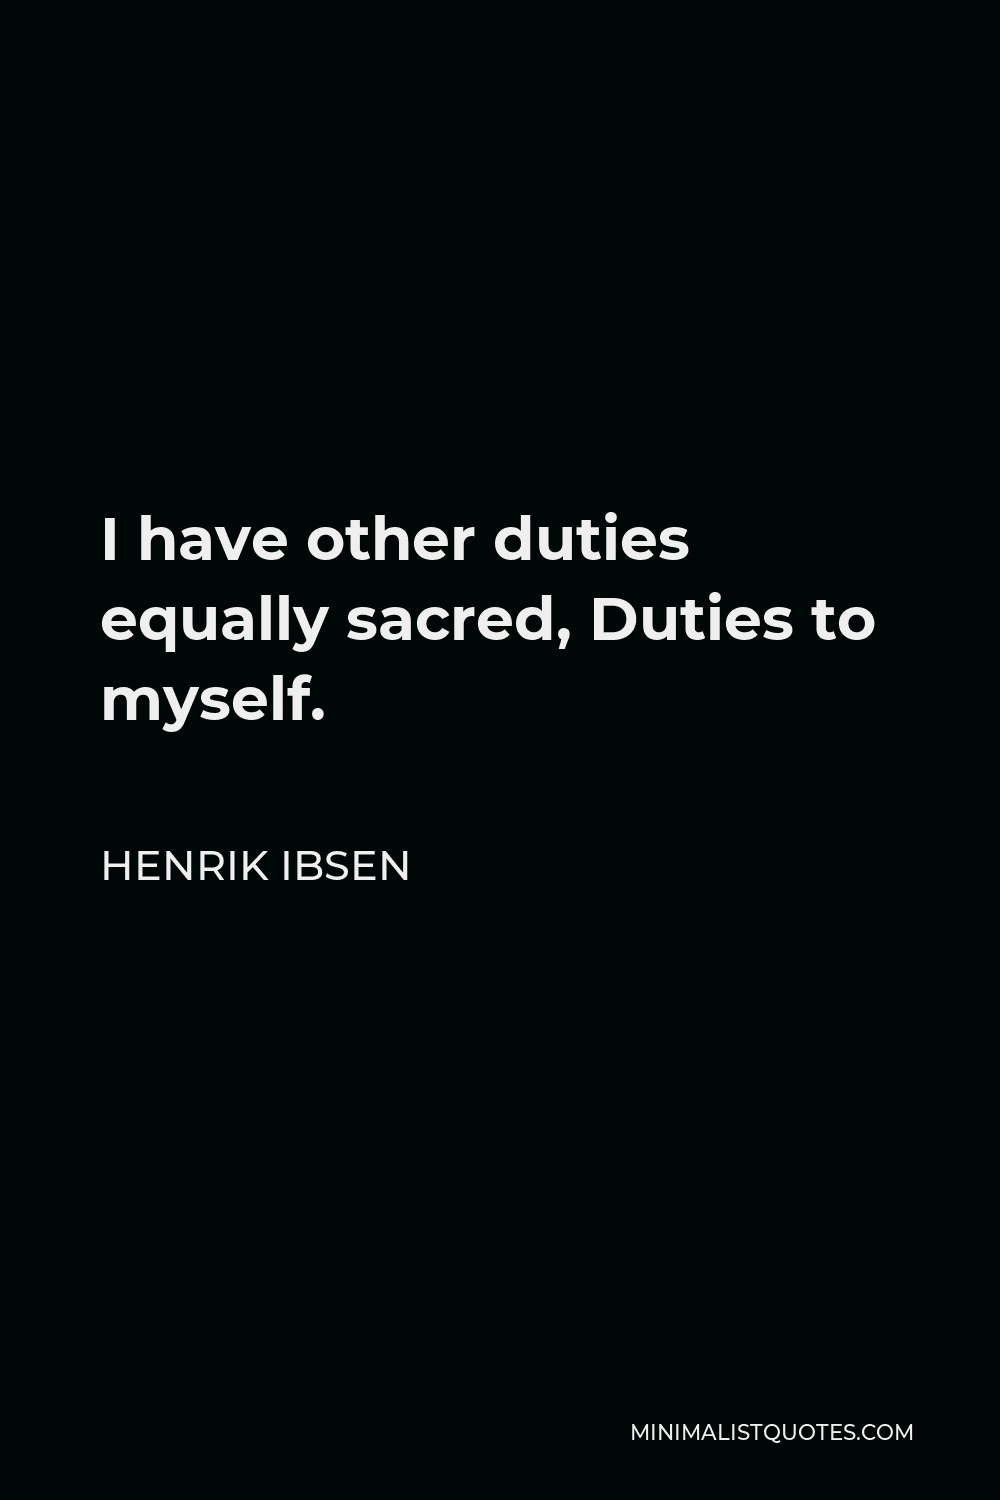 Henrik Ibsen Quote - I have other duties equally sacred, Duties to myself.